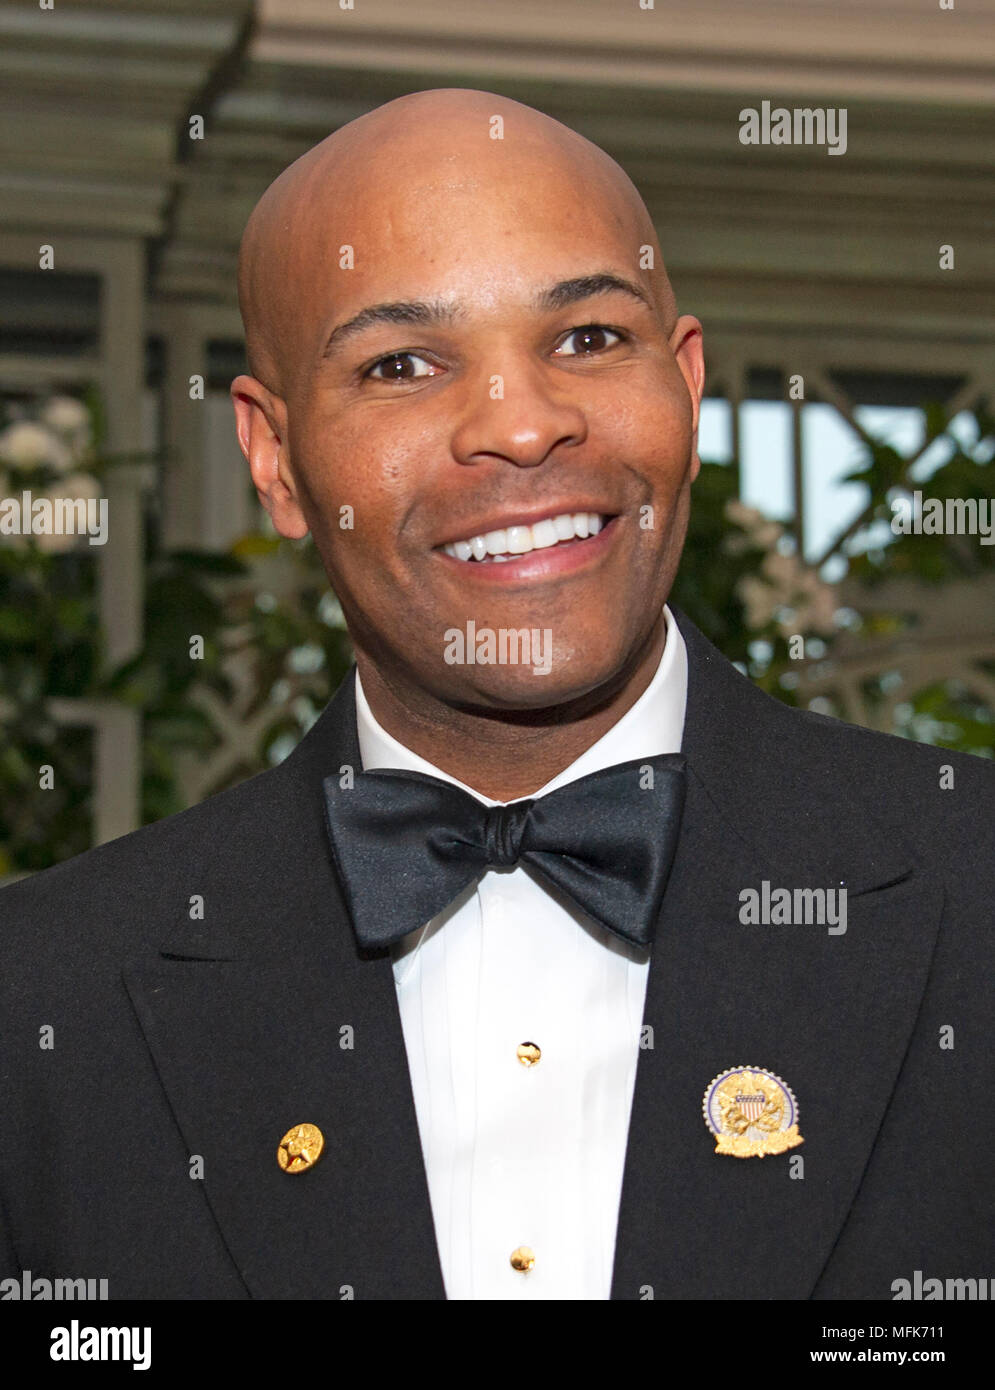 Washington, USA. 24th Apr, 2018. United States Surgeon General Jerome Adams arrives for the State Dinner honoring Dinner honoring President Emmanuel Macron of the French Republic and Mrs. Brigitte Macron at the White House in Washington, DC on Tuesday, April 24, 2018. Credit: Ron Sachs/CNP - NO WIRE SERVICE - Credit: Ron Sachs/Consolidated News Photos/Ron Sachs - CNP/dpa/Alamy Live News Stock Photo